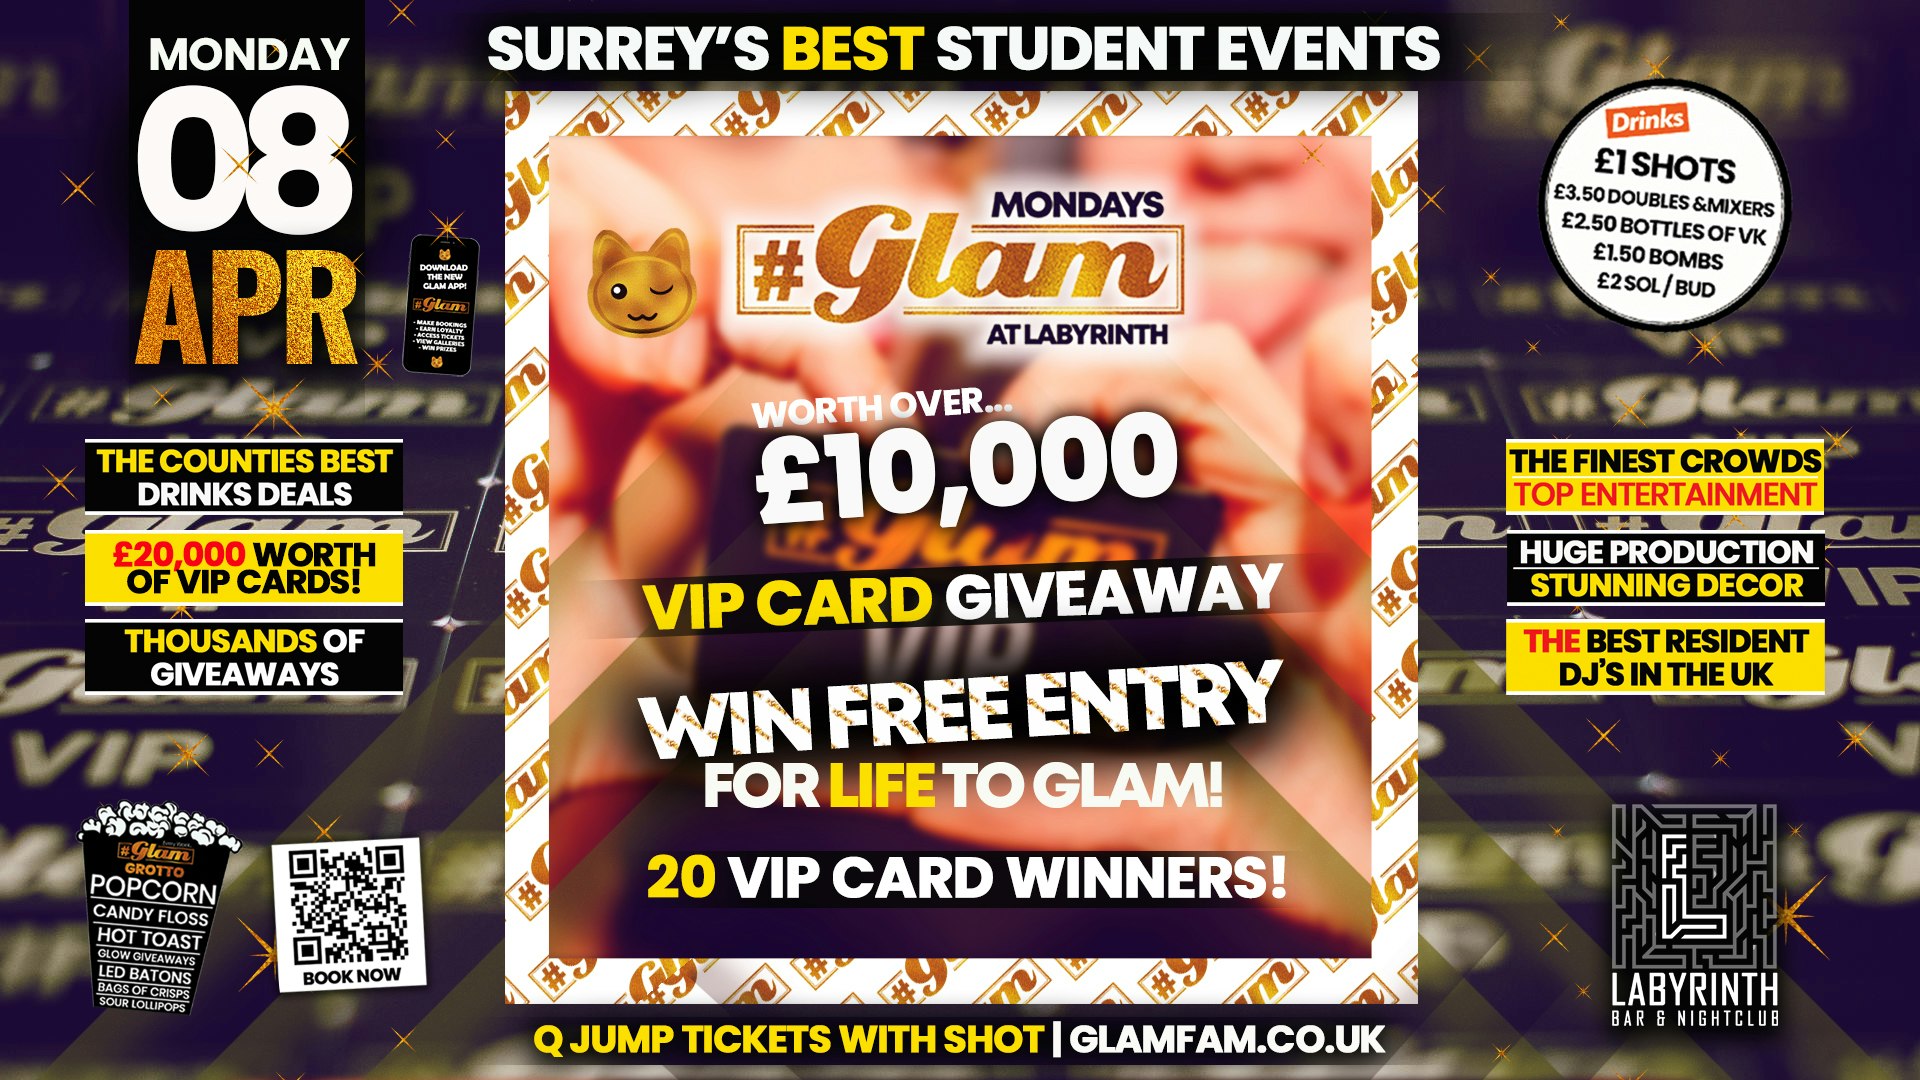 Glam – Surrey’s Best Student Events! VIP CARD GIVEAWAY! 😲